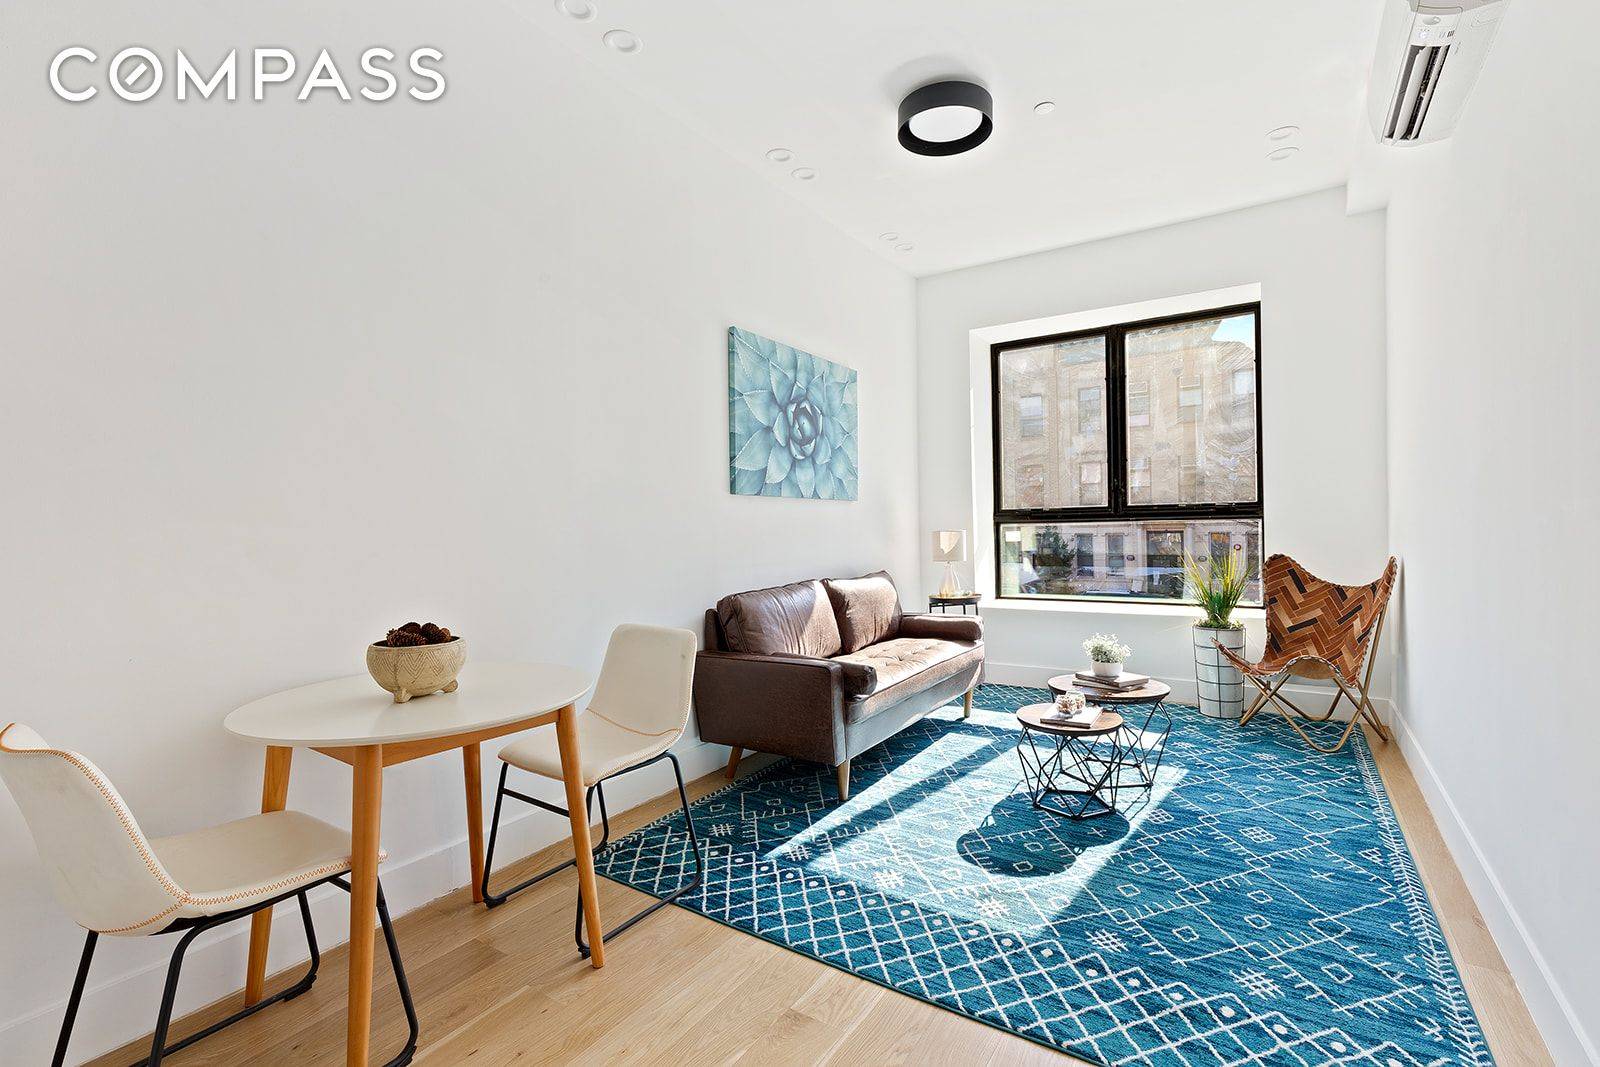 Surround yourself in sleek European styling and premium finishes in this brand new one bedroom, one bathroom condominium in the heart of Bed Stuy.